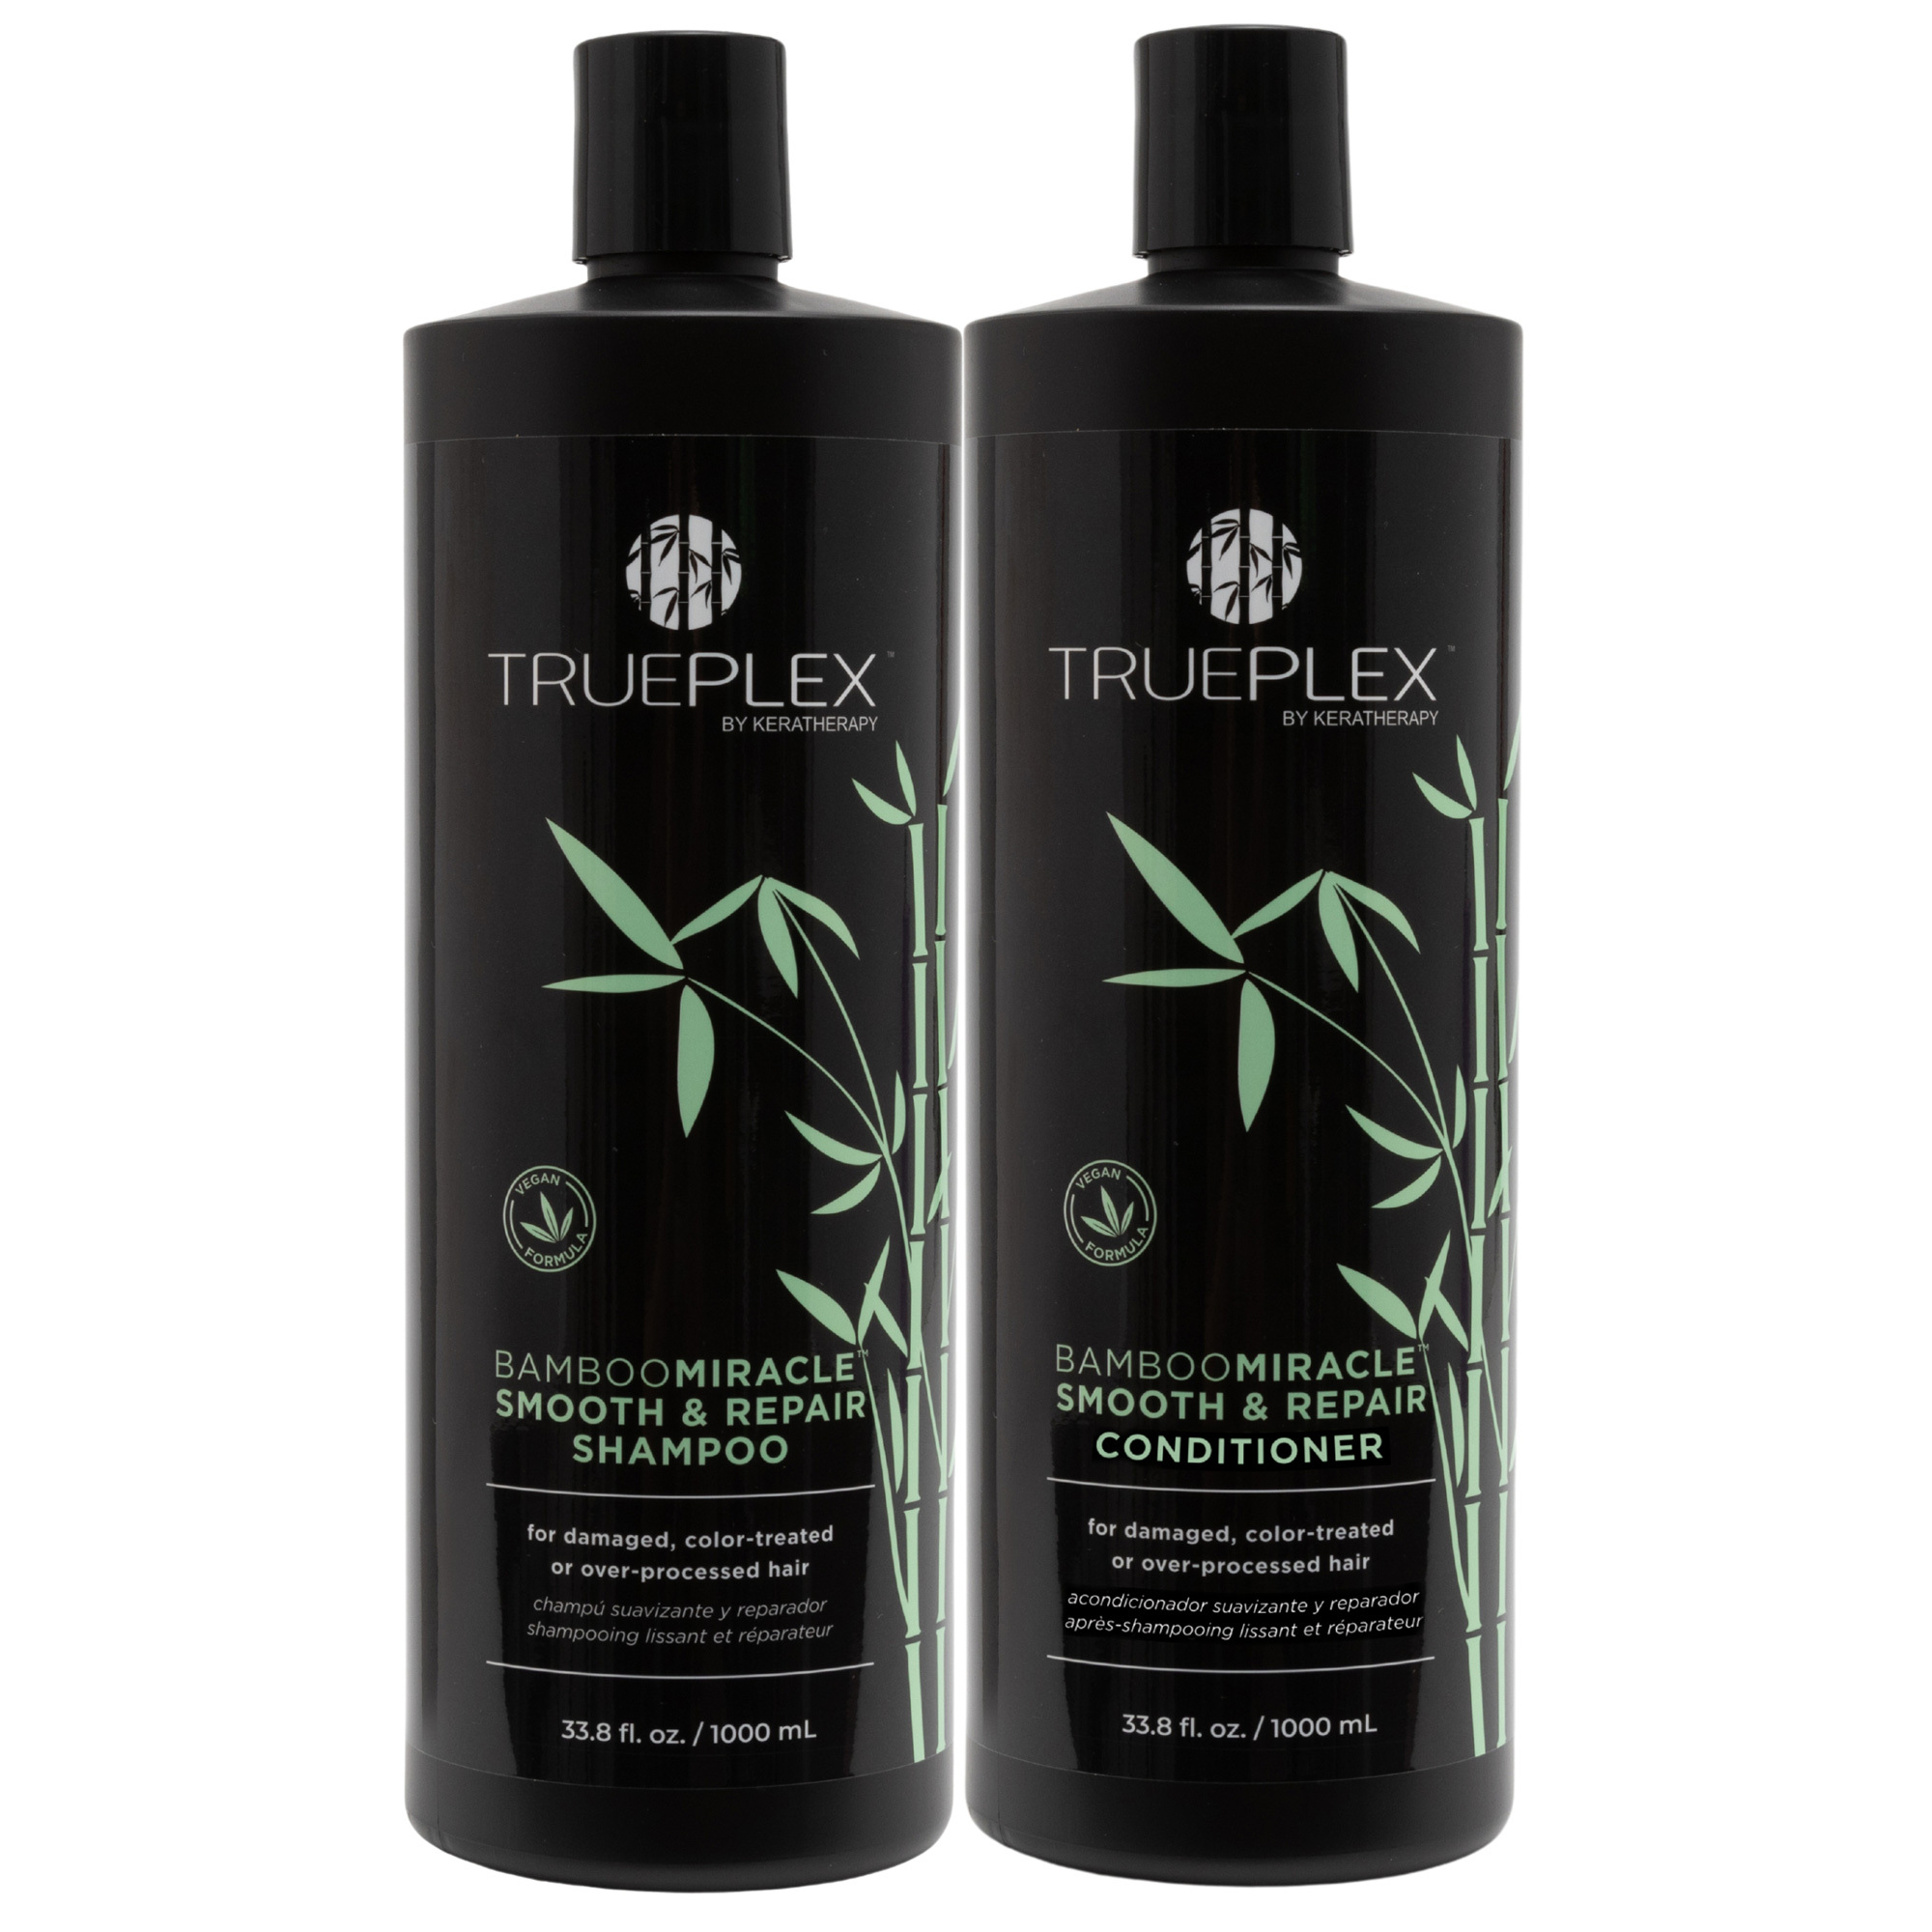 TruePlex Bamboo Miracle: Smooth & Repair Shampoo & Conditioner Deal